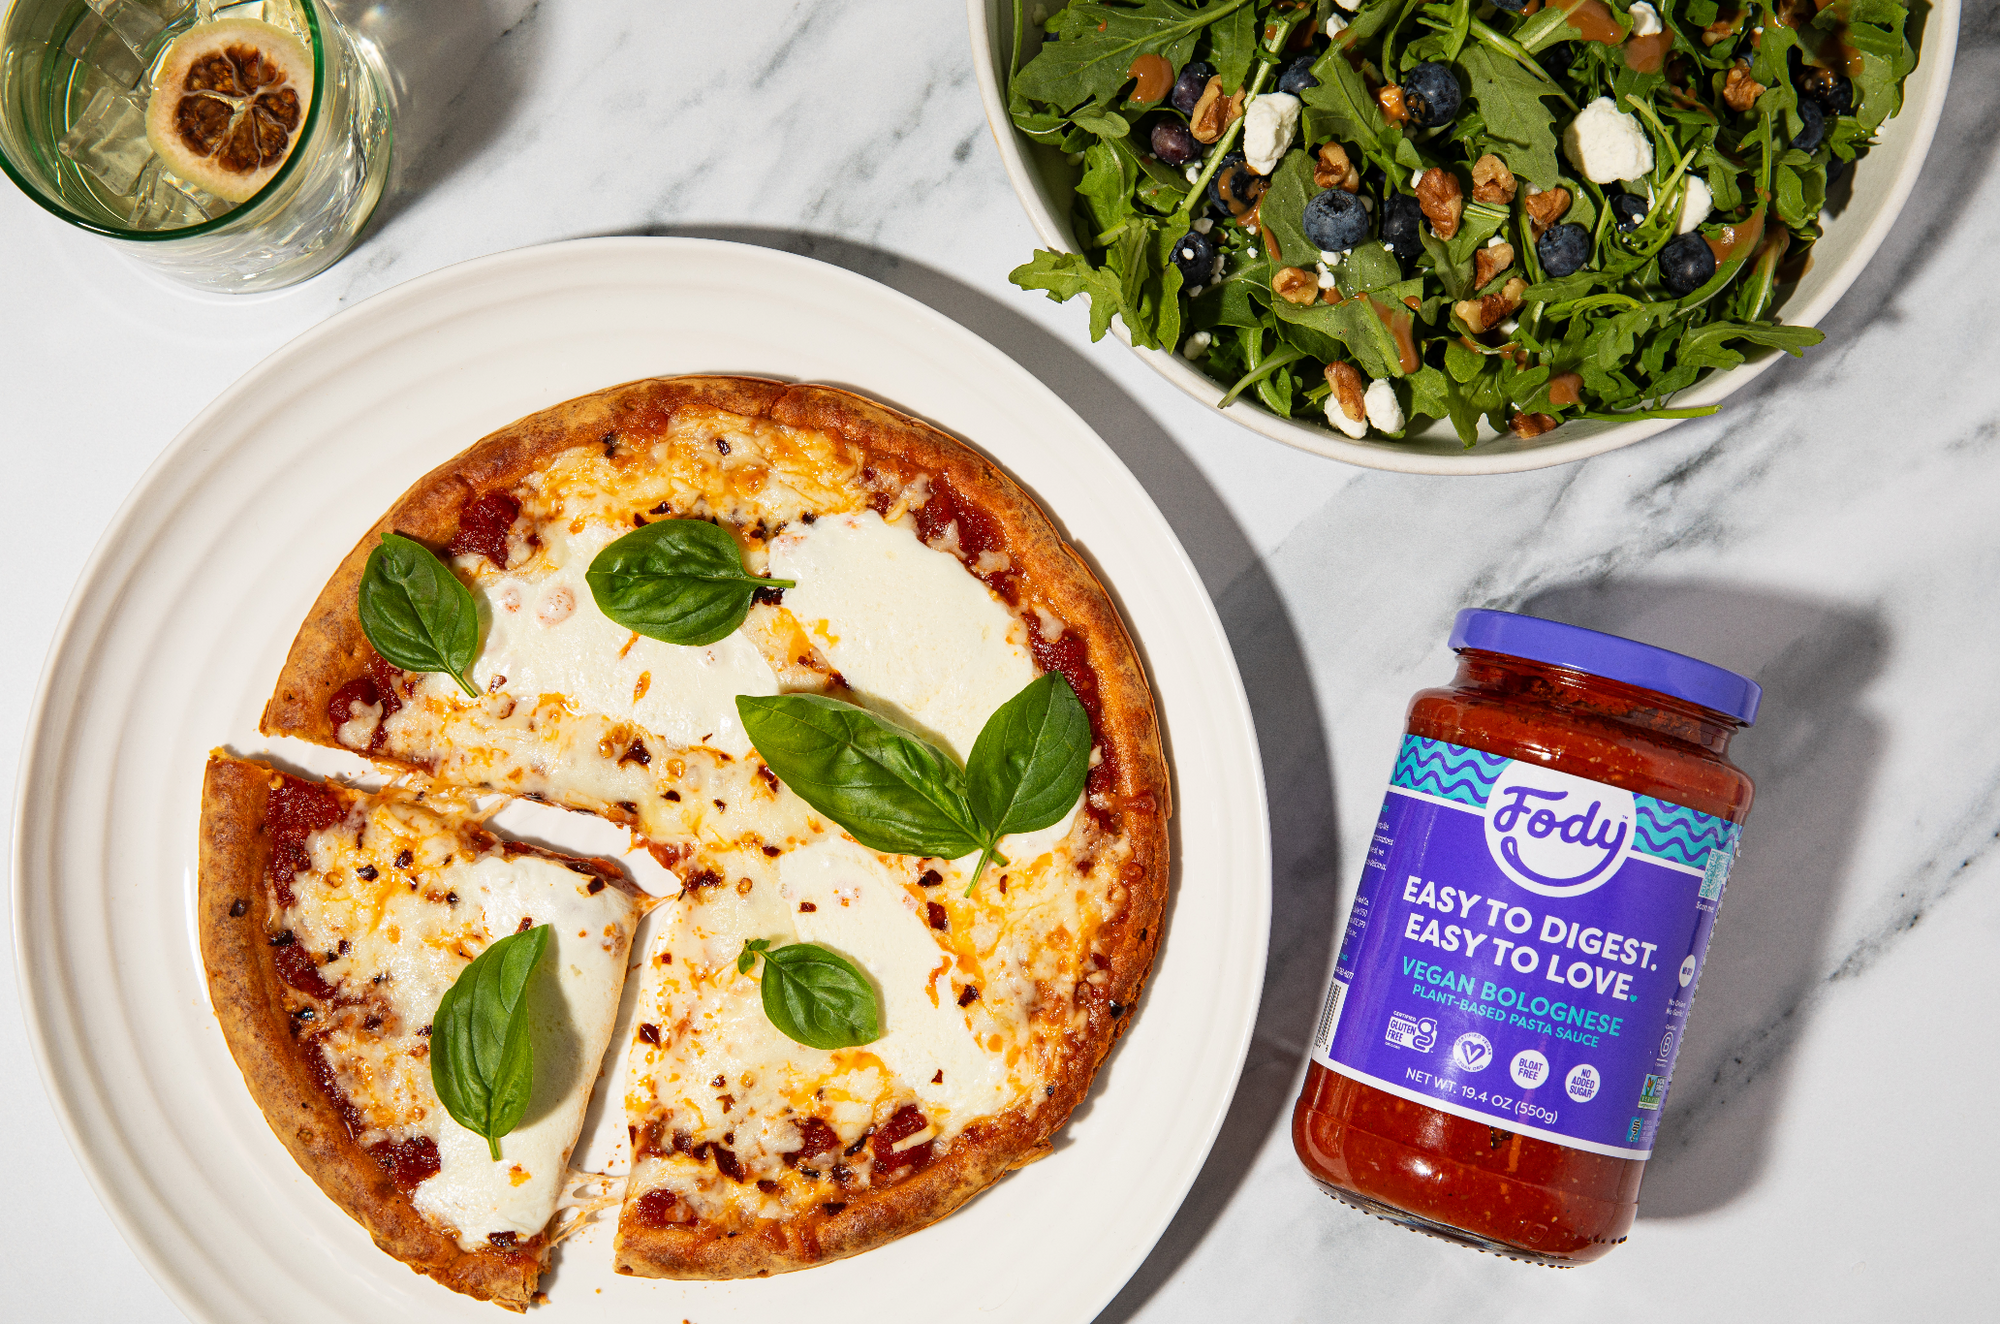 Fody’s Pizza Bolognese with Blueberry  Arugula & Goat Cheese Salad